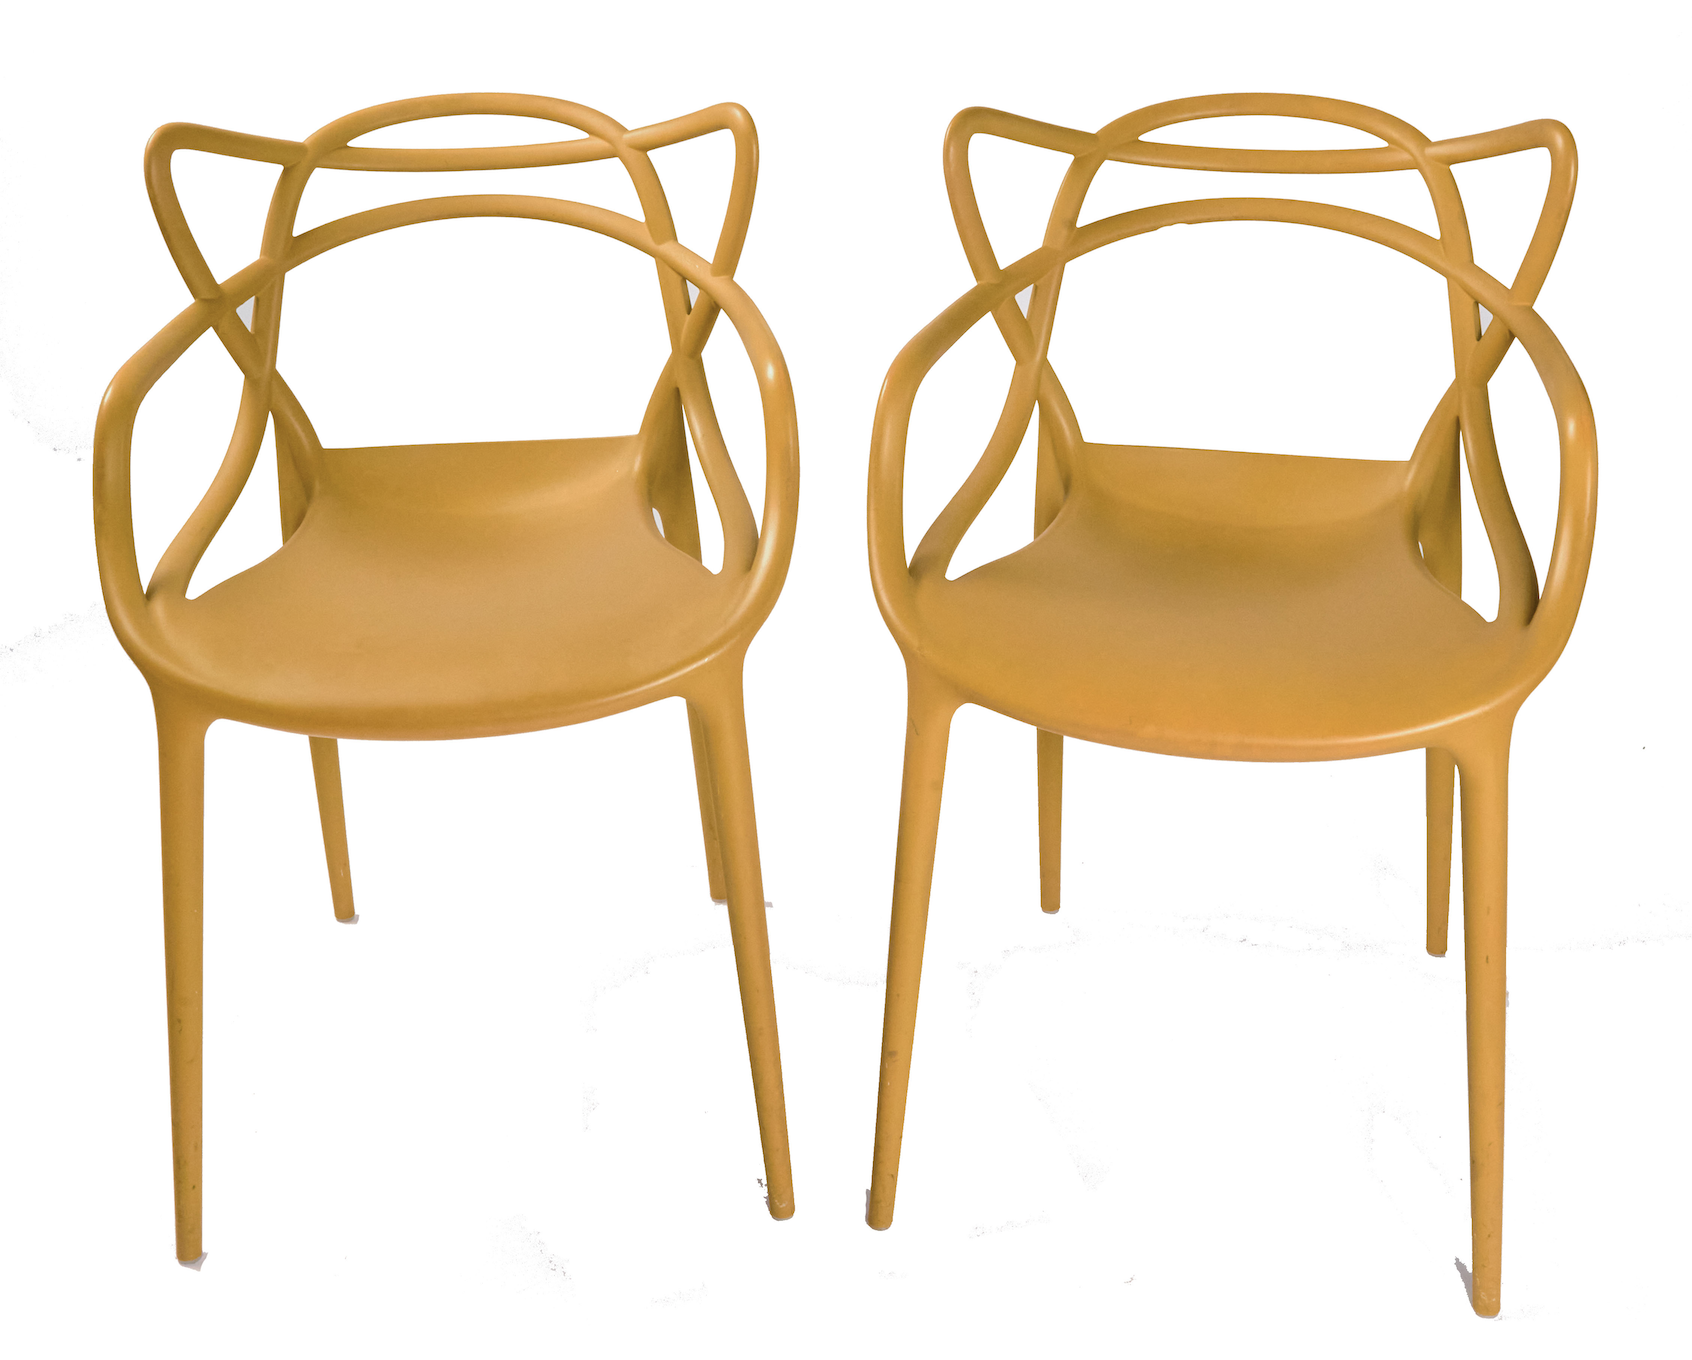 Mustard-colored Kartell Masters chairs, est. $300-$500